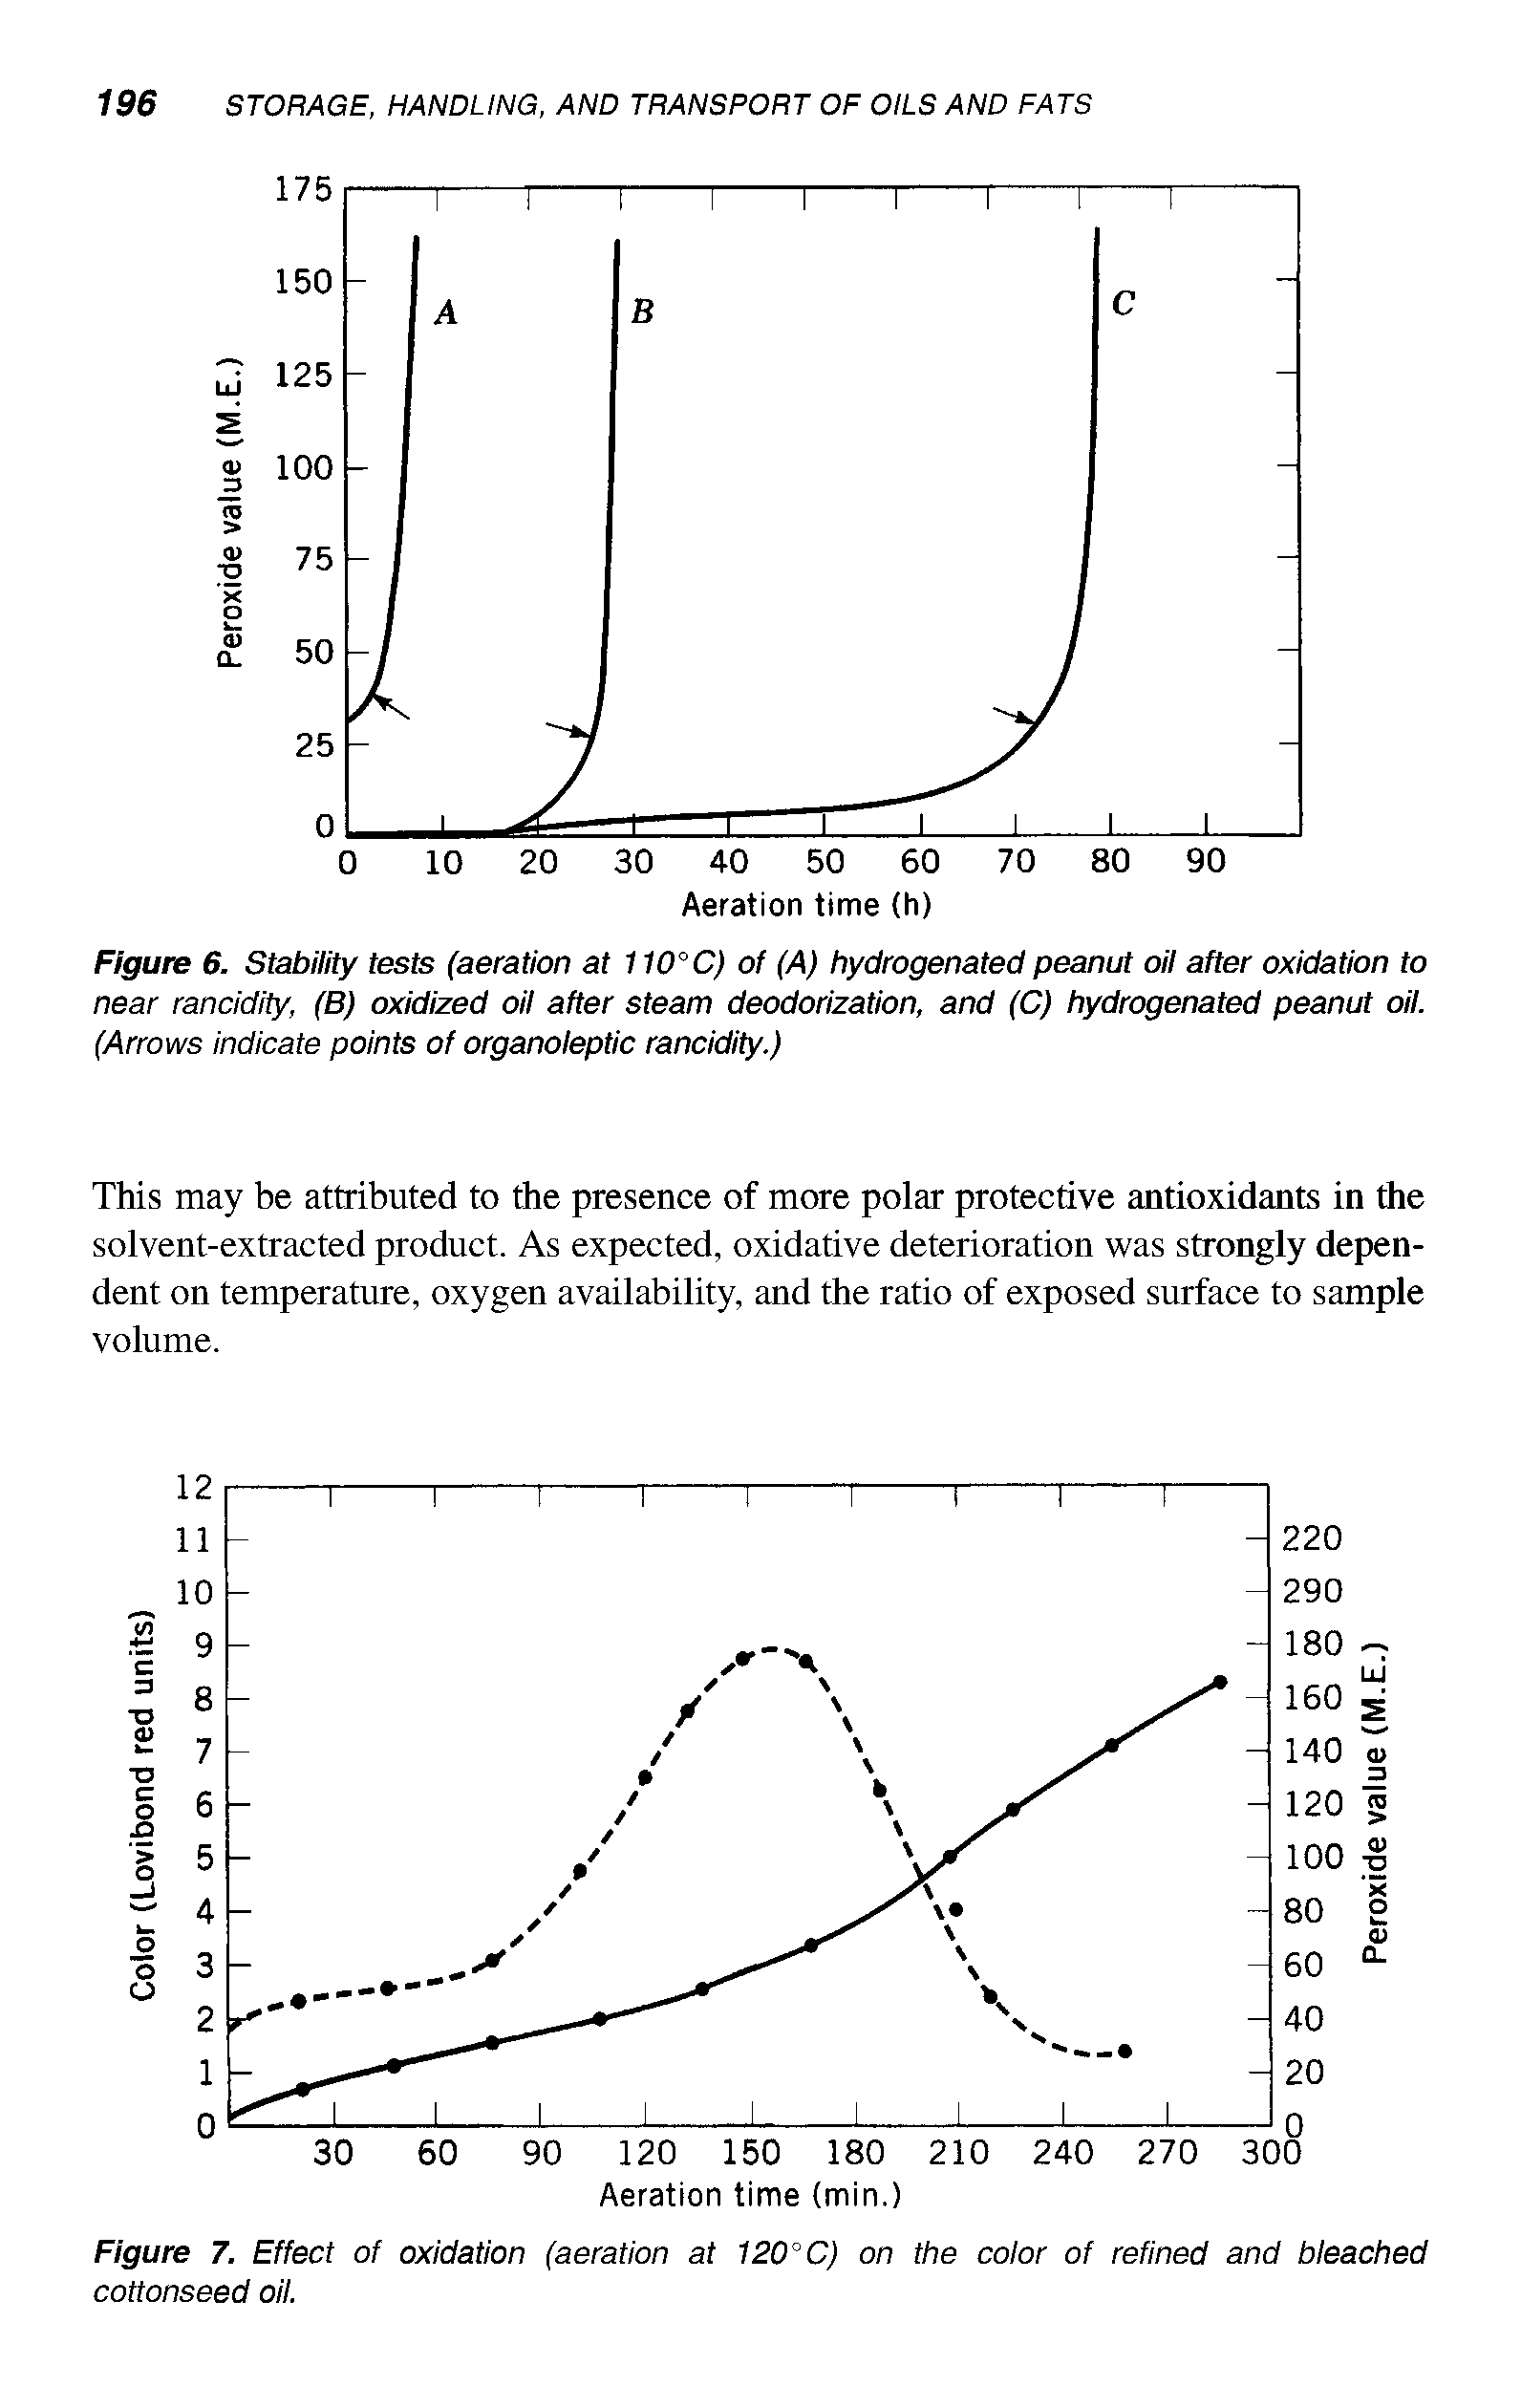 Figure 7. Effect of oxidation (aeration at 120°C) on the color of refined and bleached cottonseed oil.